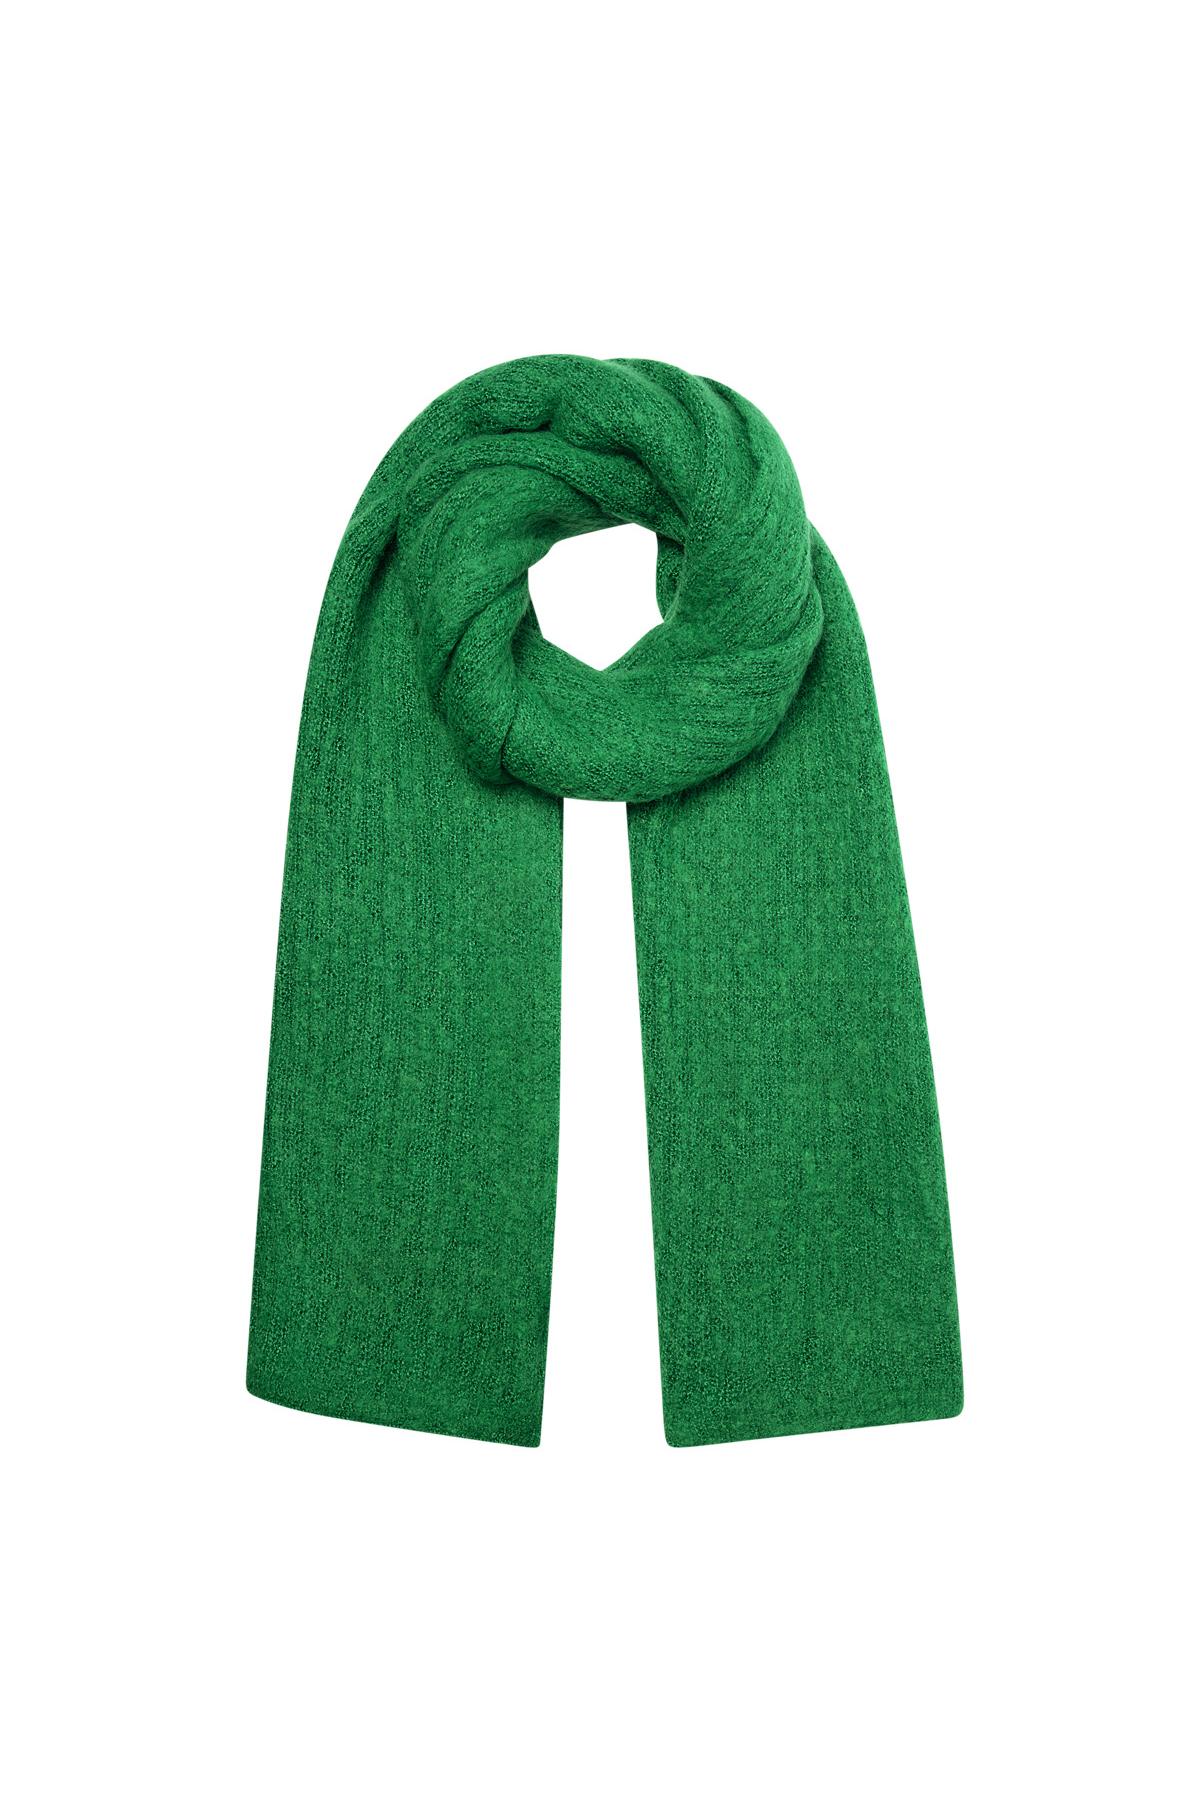 Scarf knitted plain - green h5 